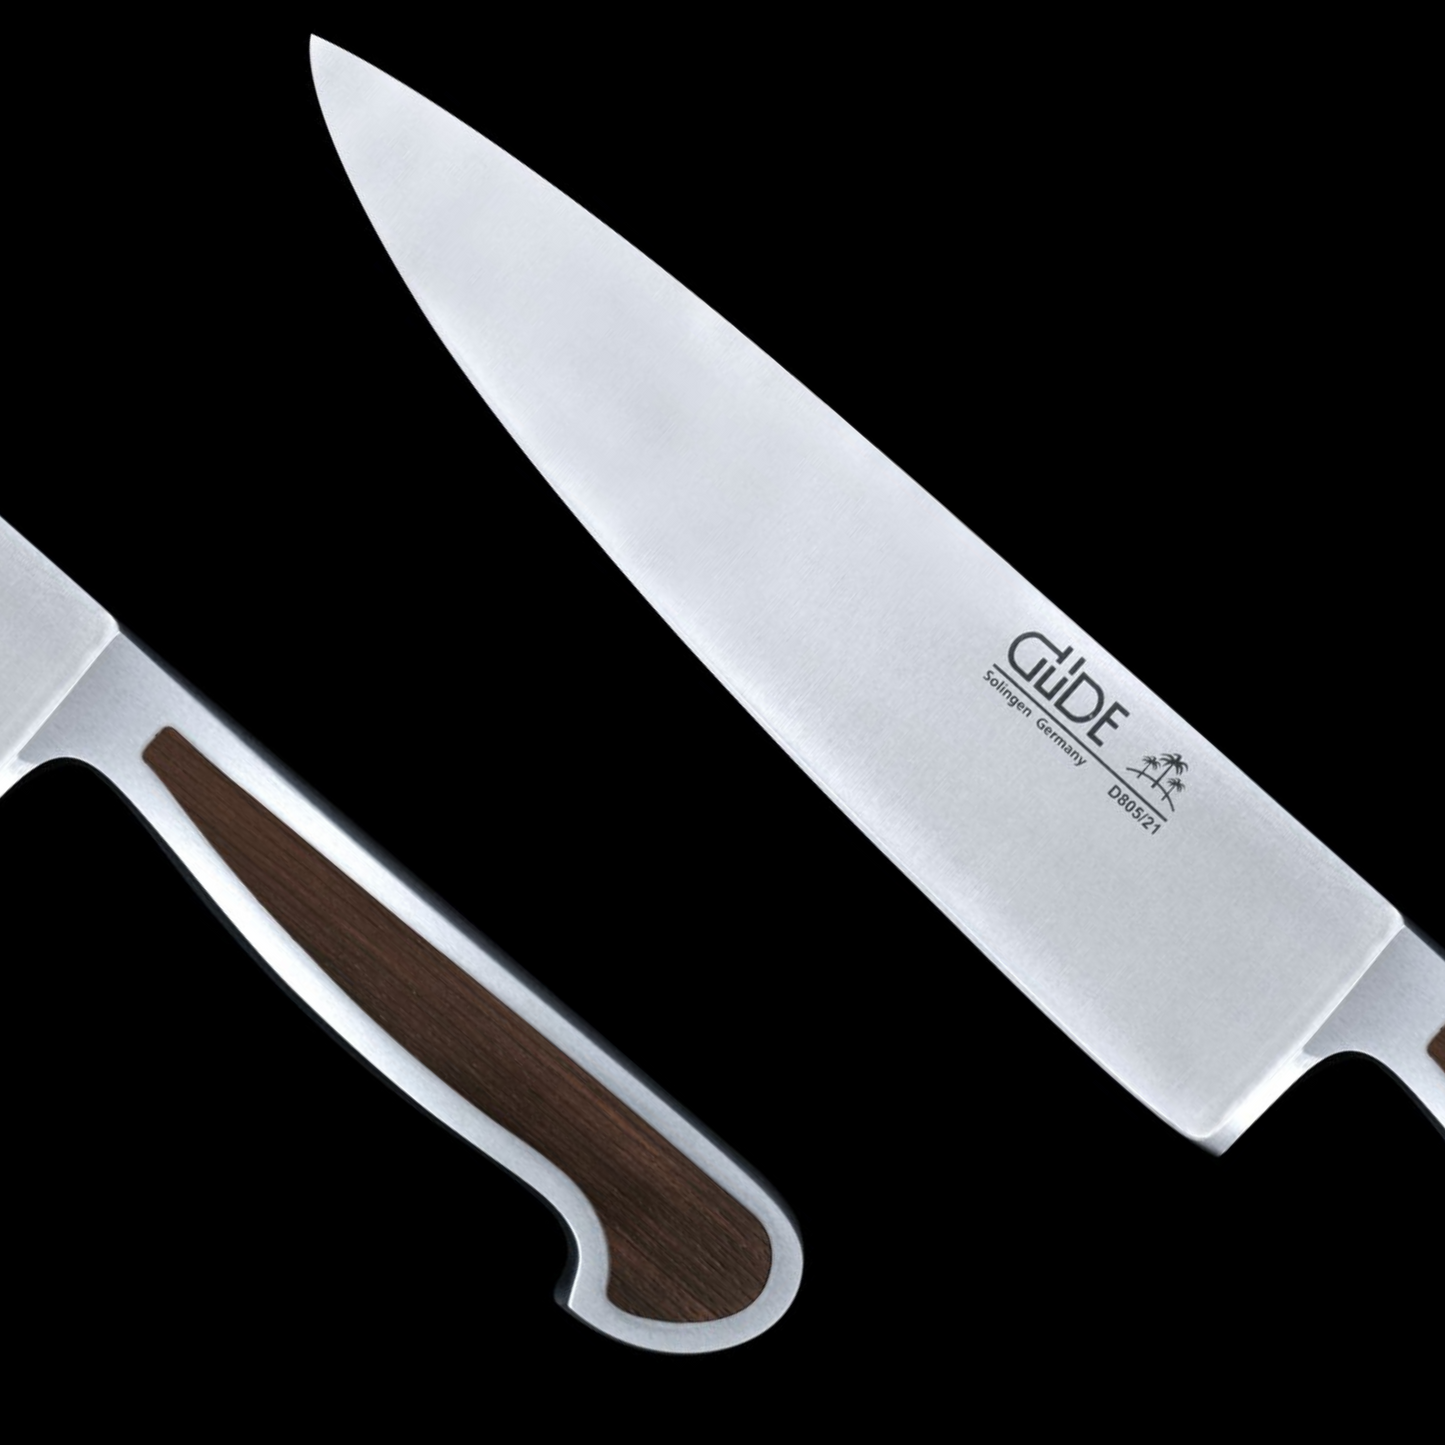 Gude Delta Series Forged Double Bolster Chef's Knife 8", African Black Wood Handle - GuedeUSA